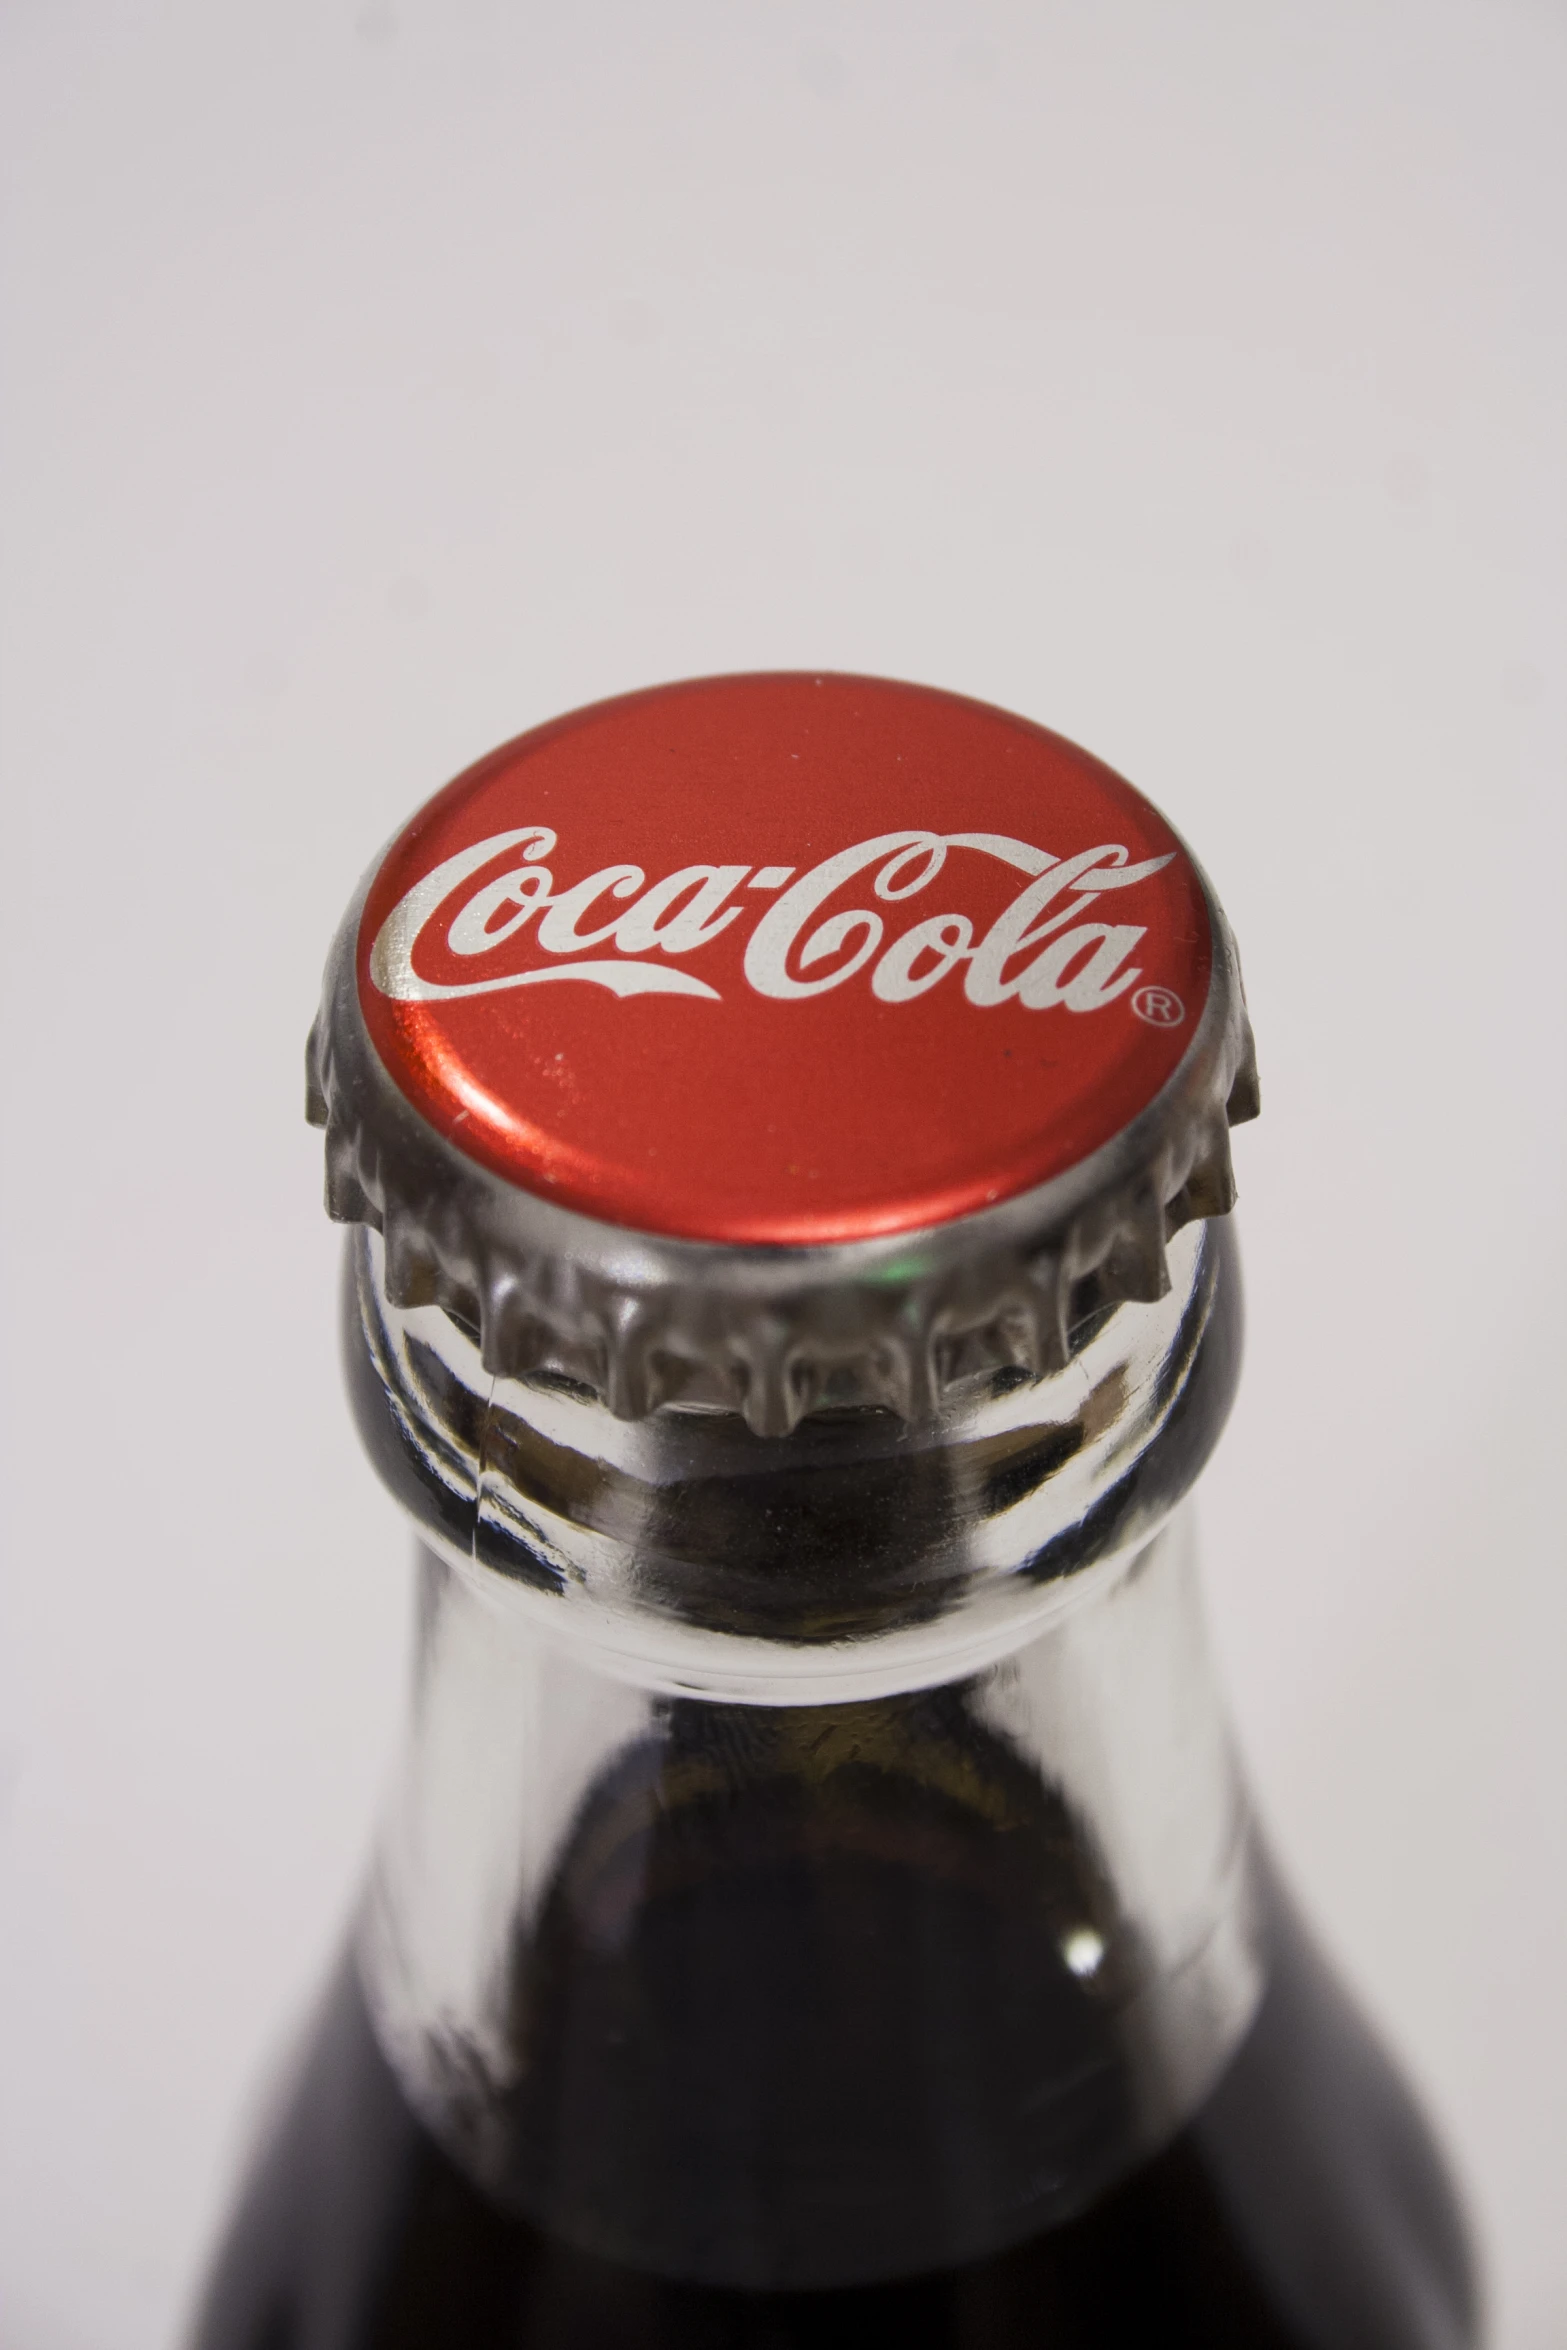 a bottle is shown with a red cap